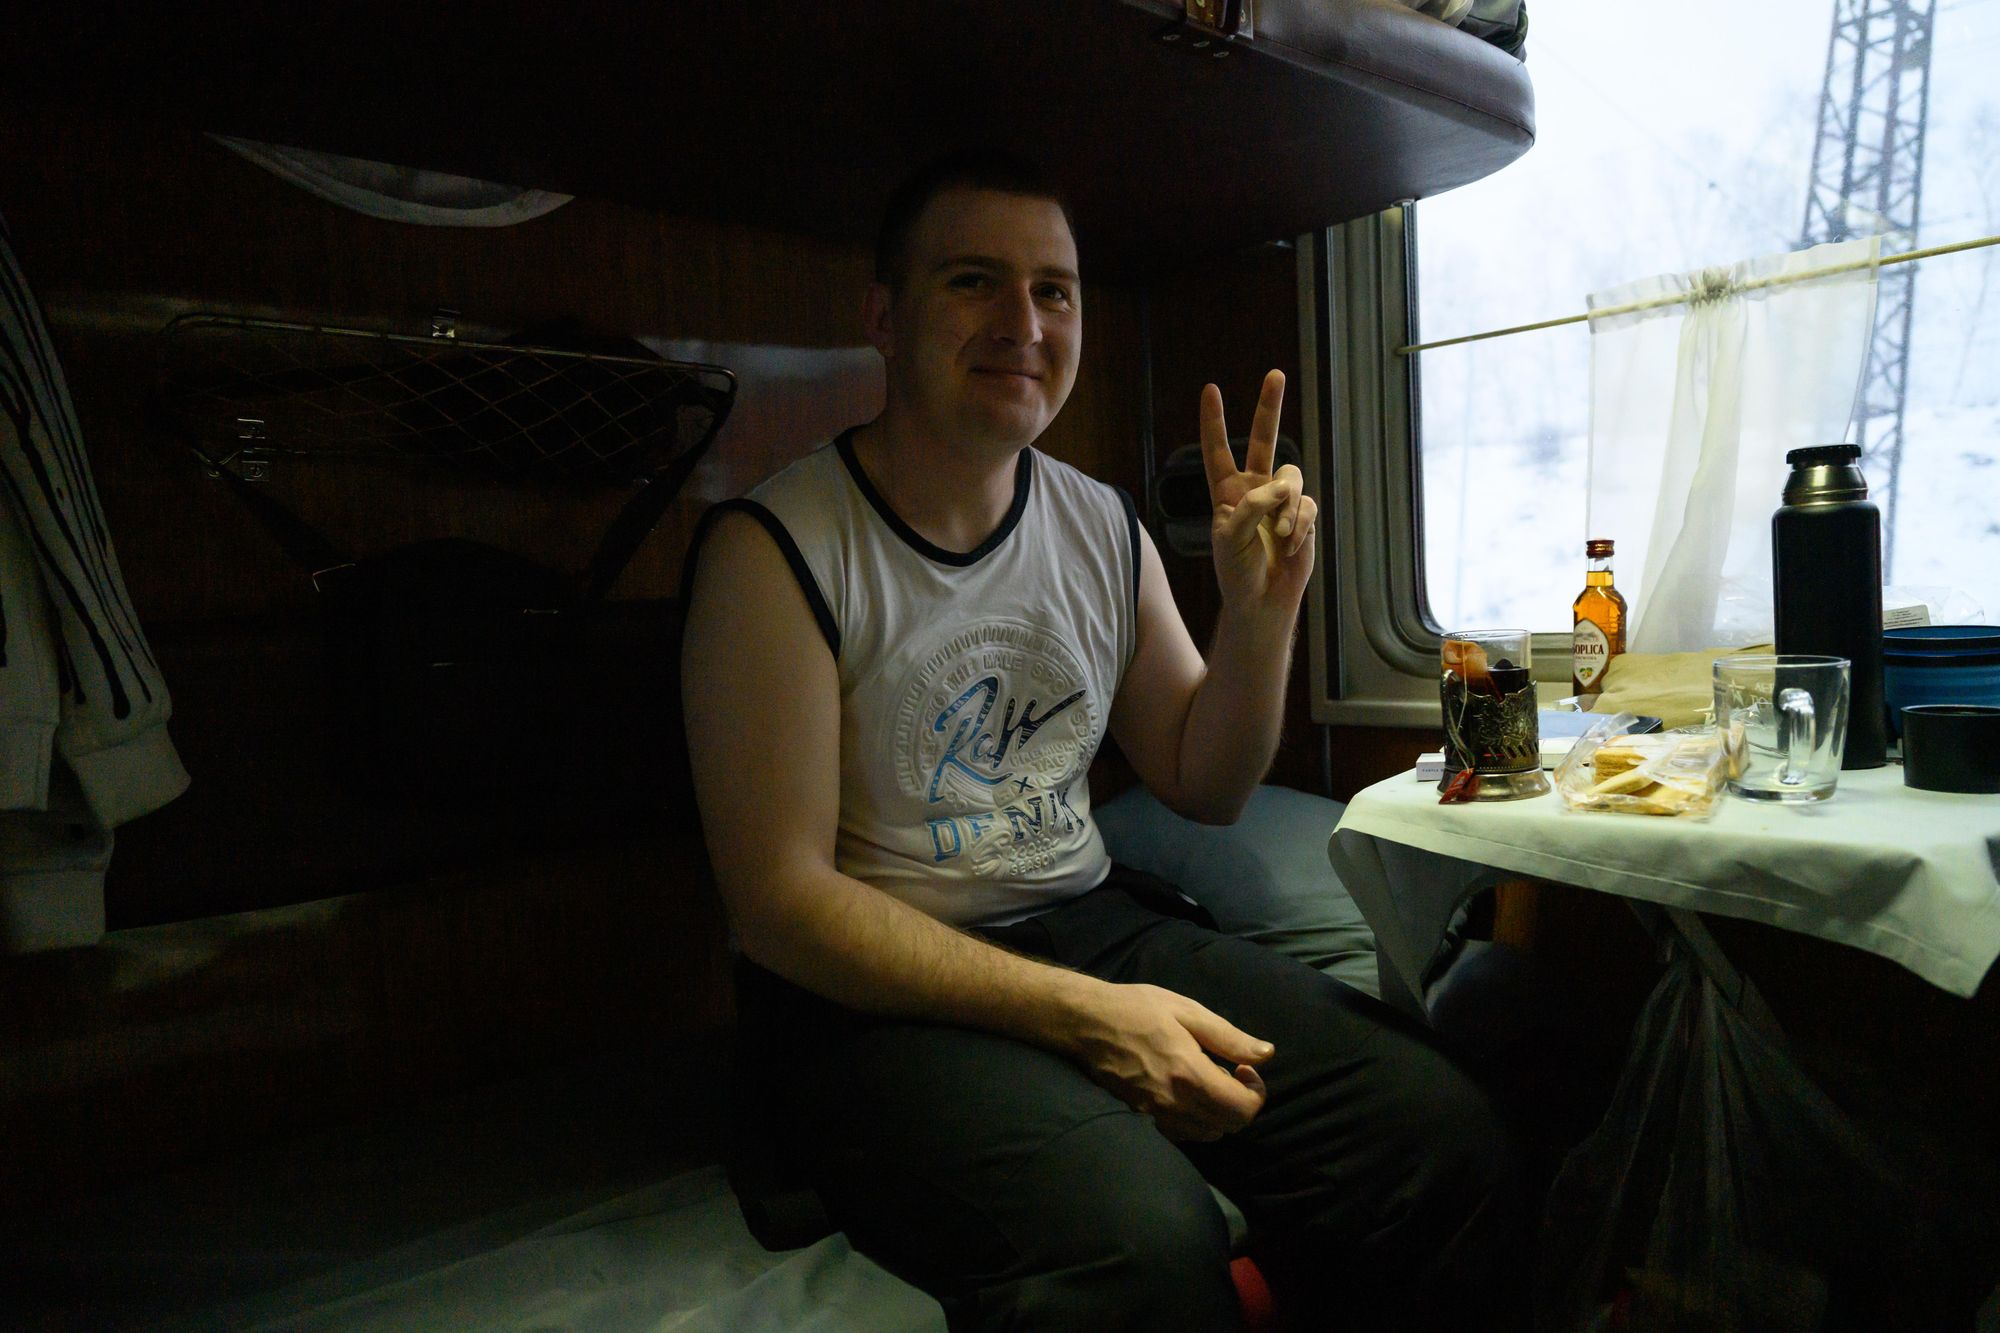 Russia to Mongolia by train, Part 1.